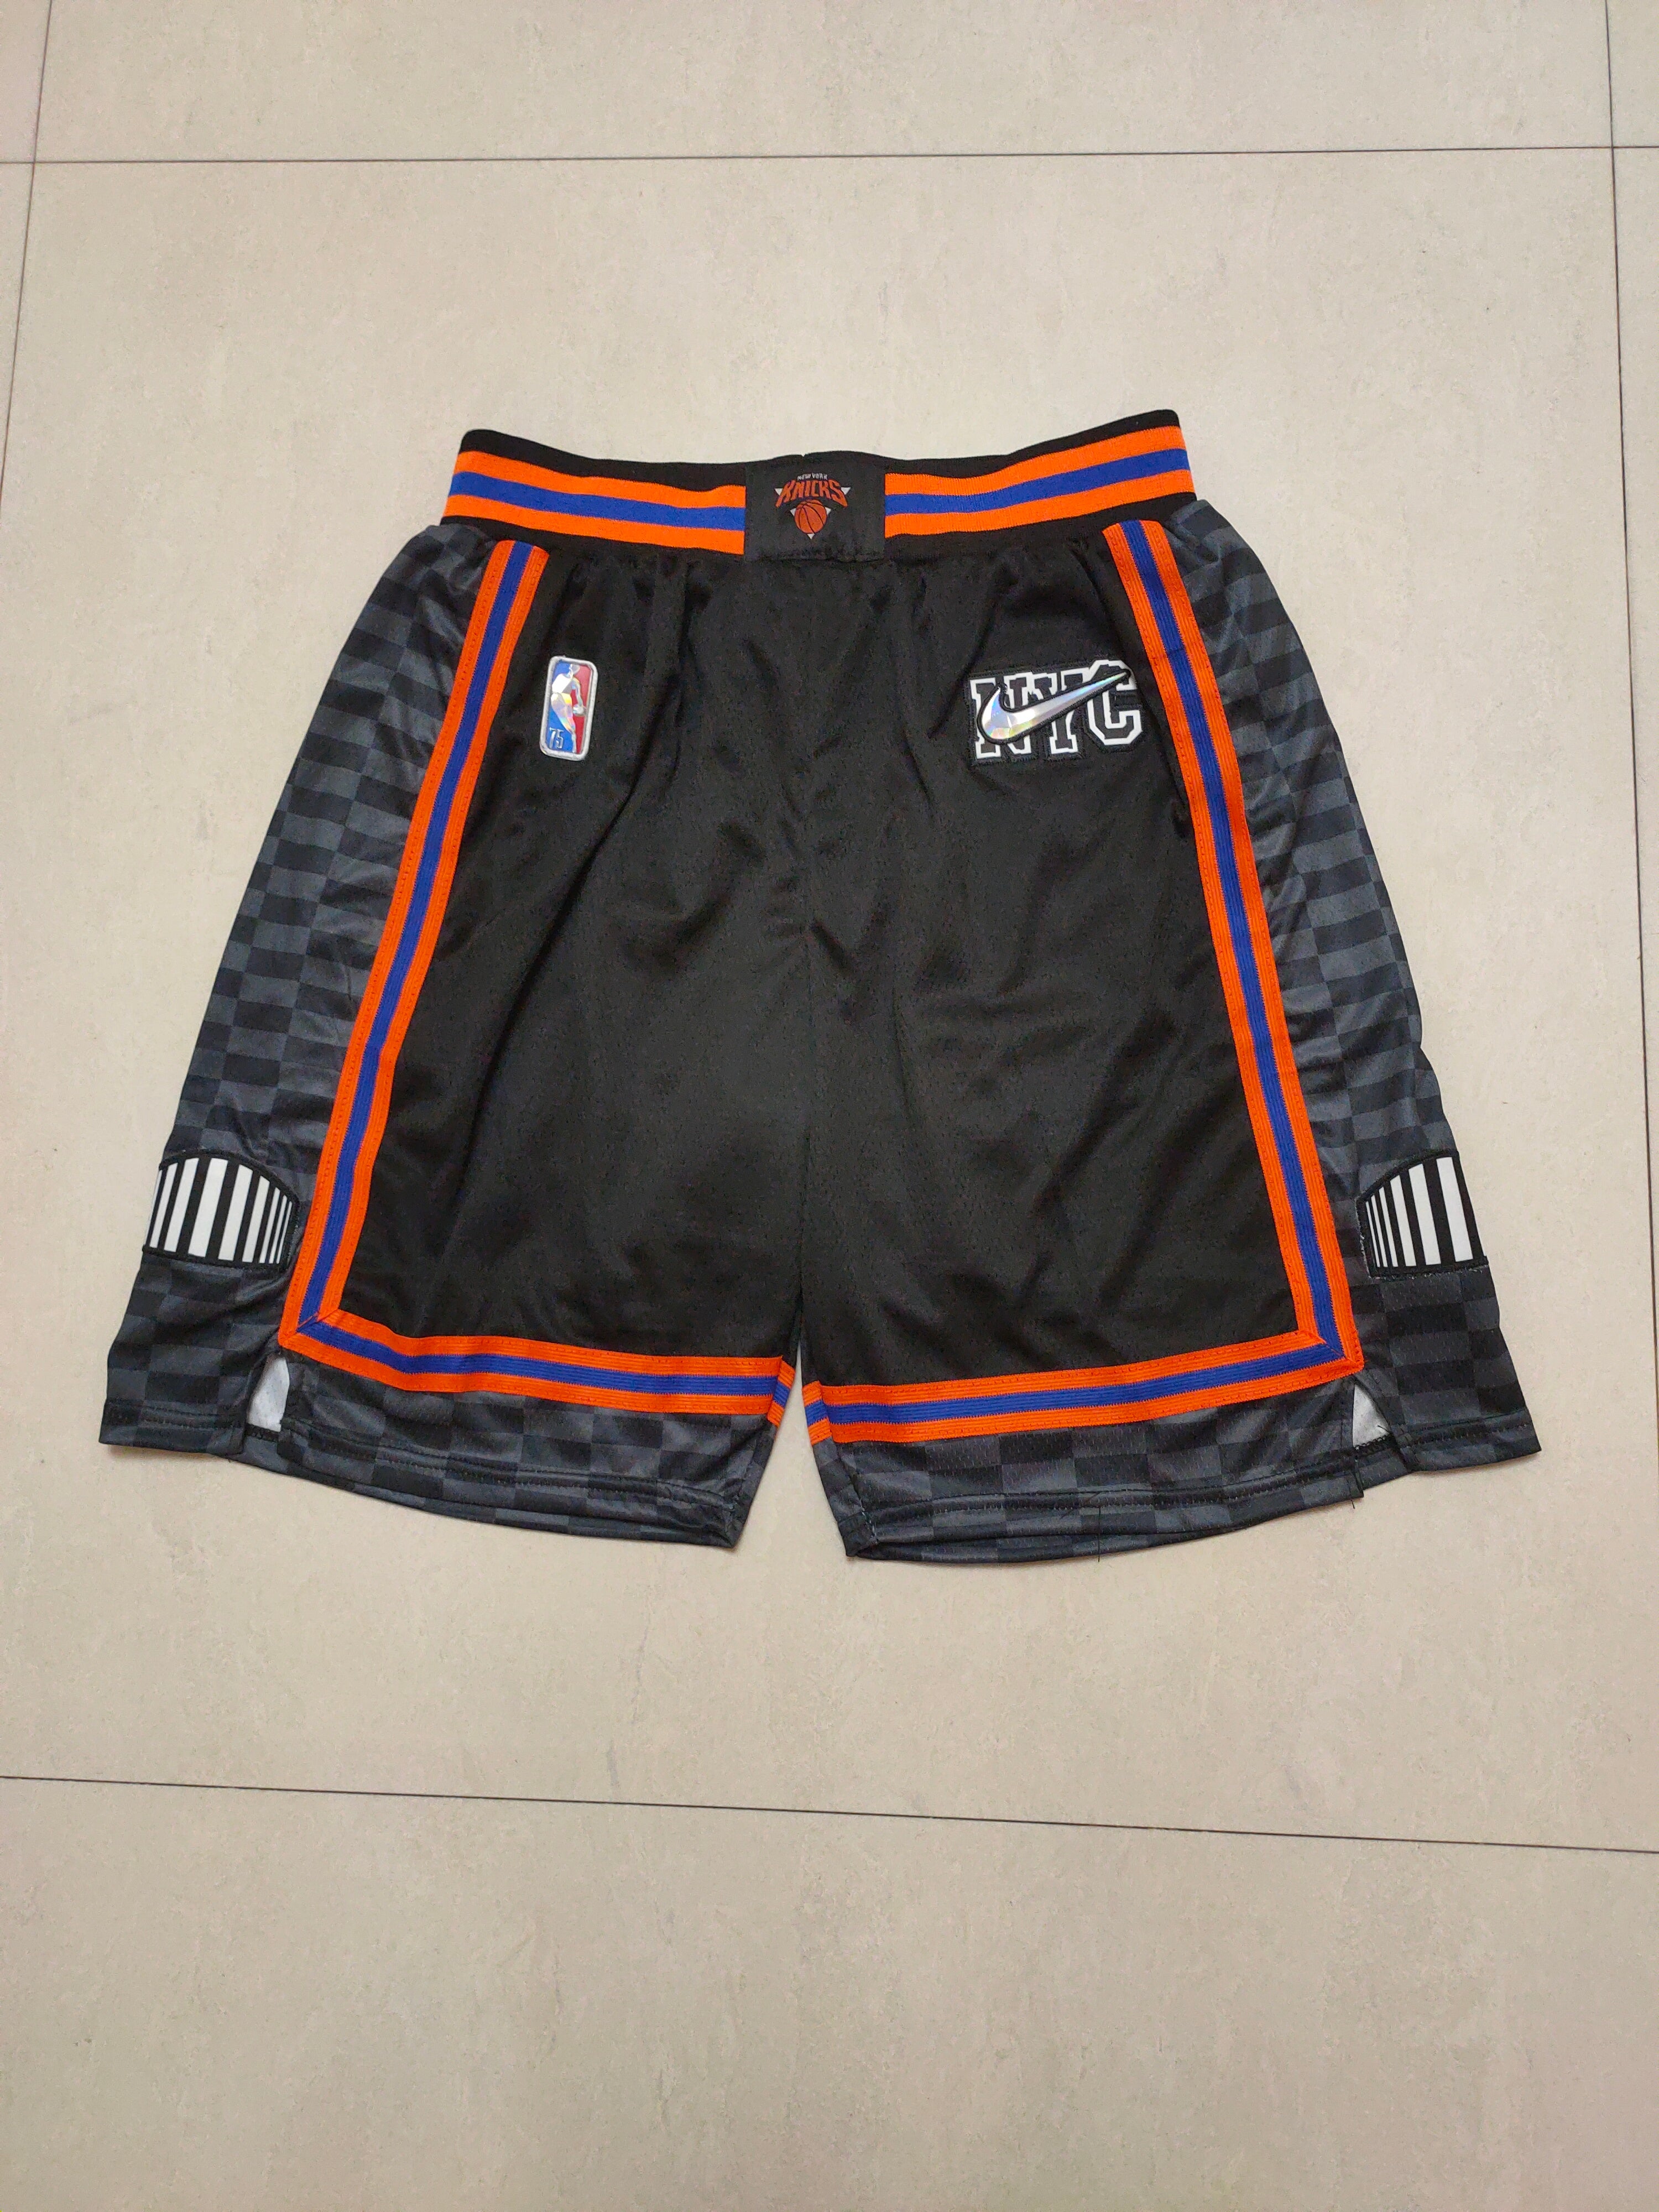 Knicks black and red shorts